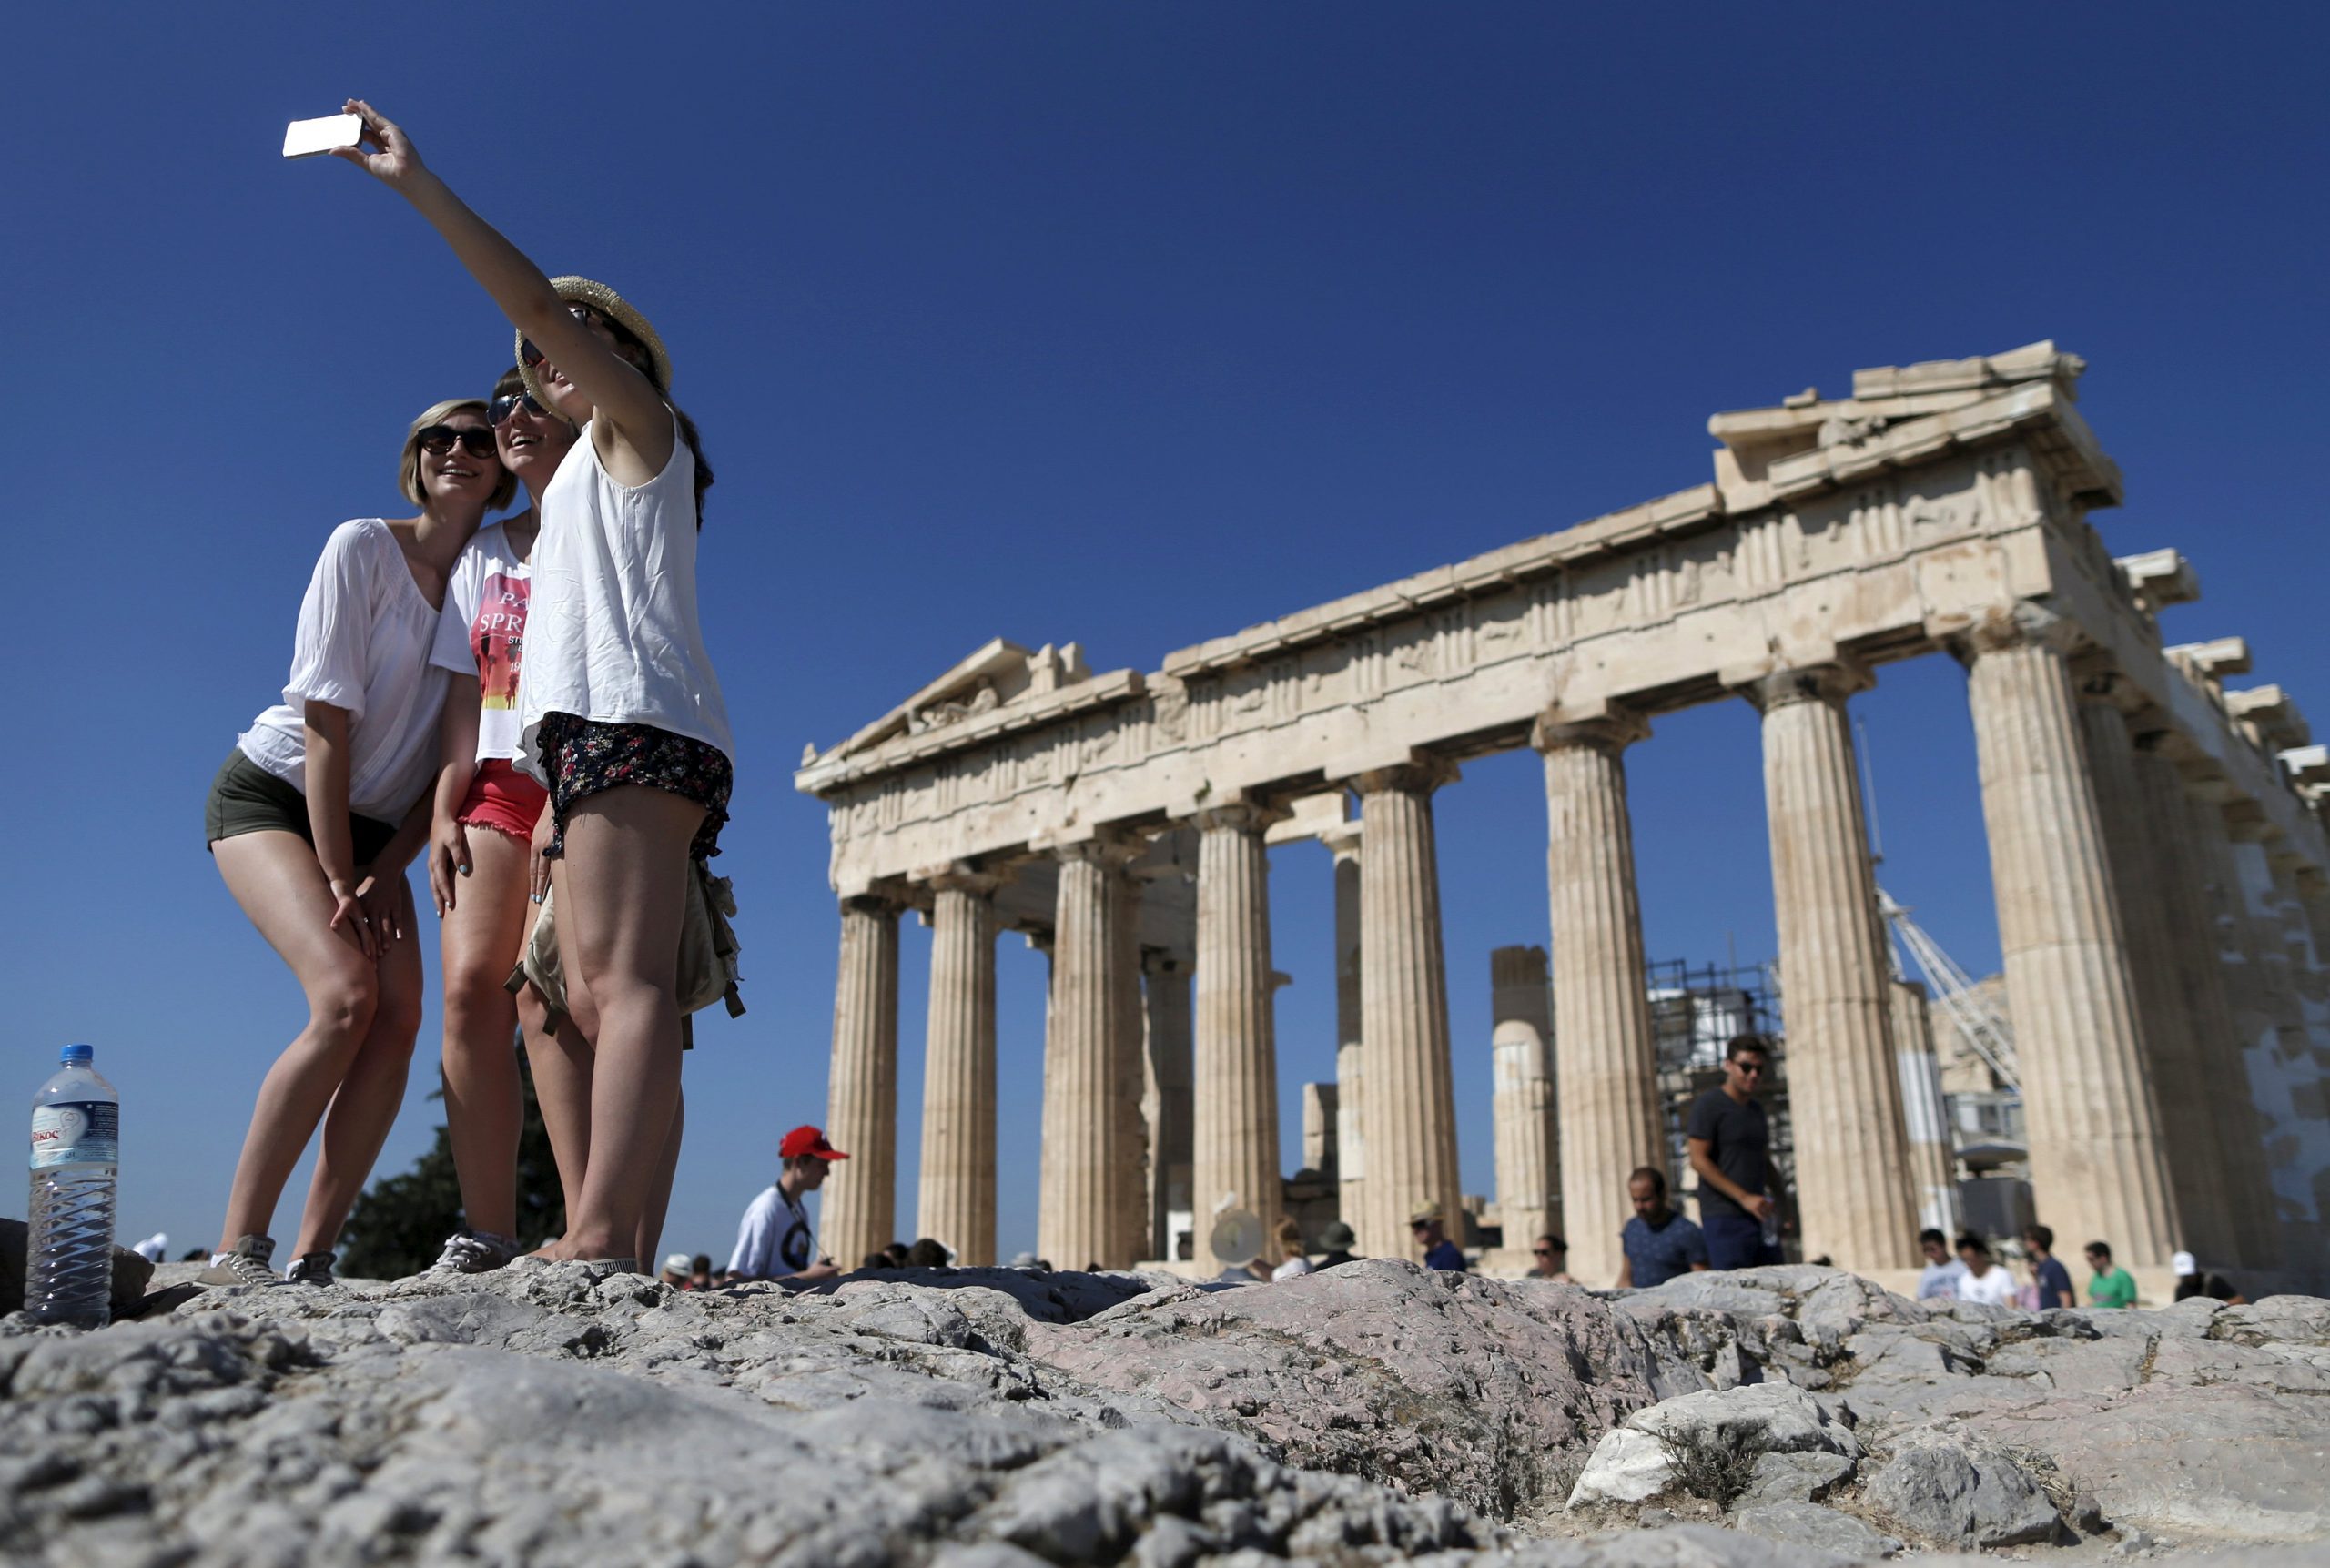 How foreign tourists evaluate Greece’s reputation